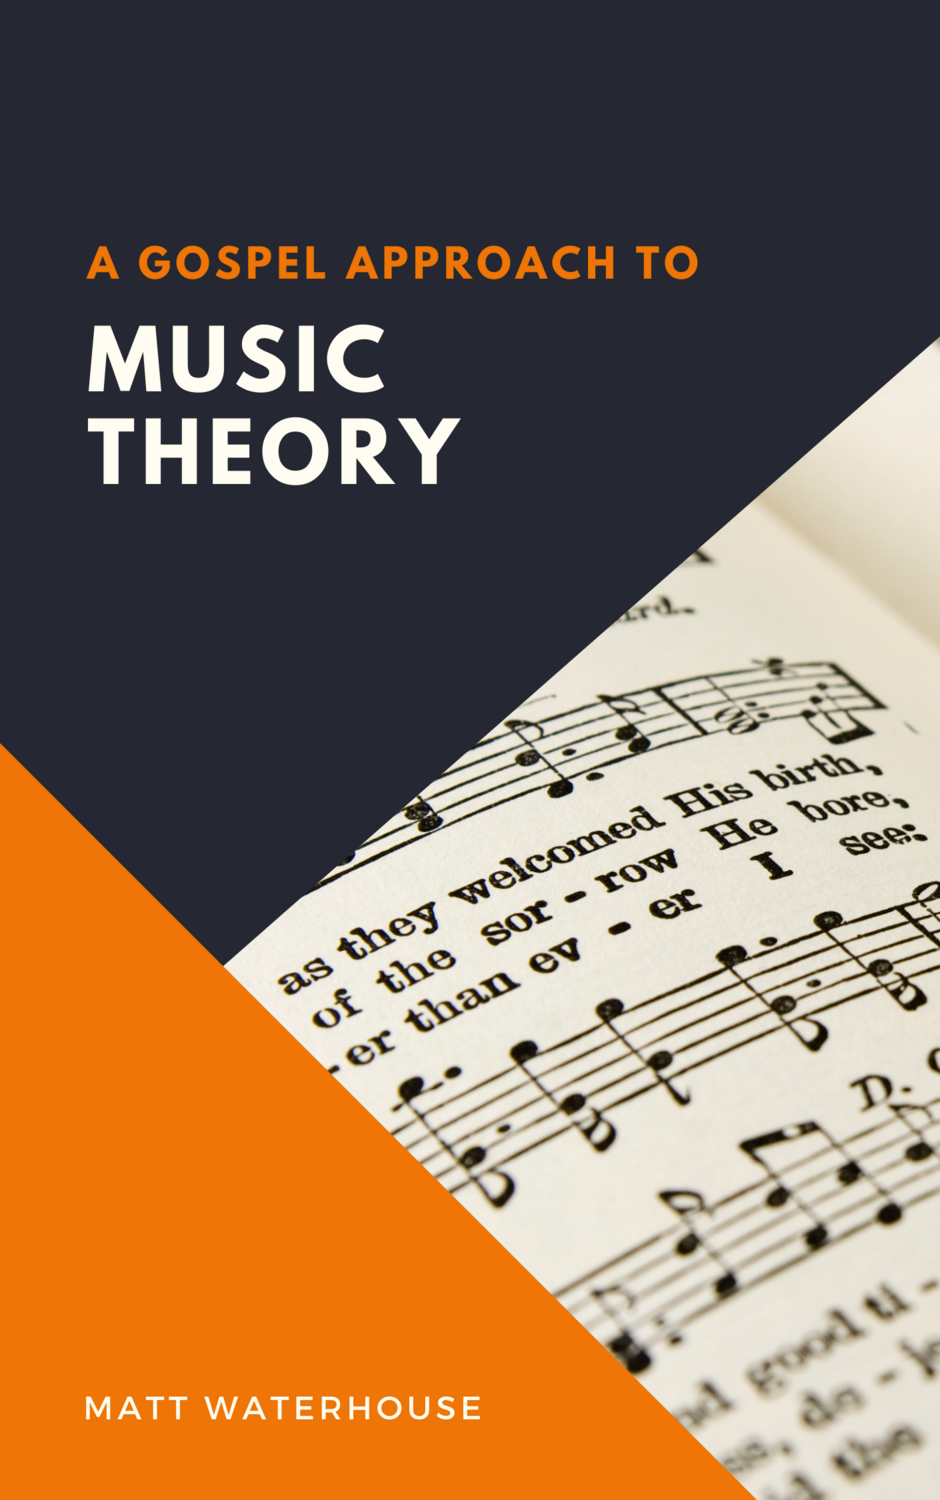 A Gospel Approach to Music Theory